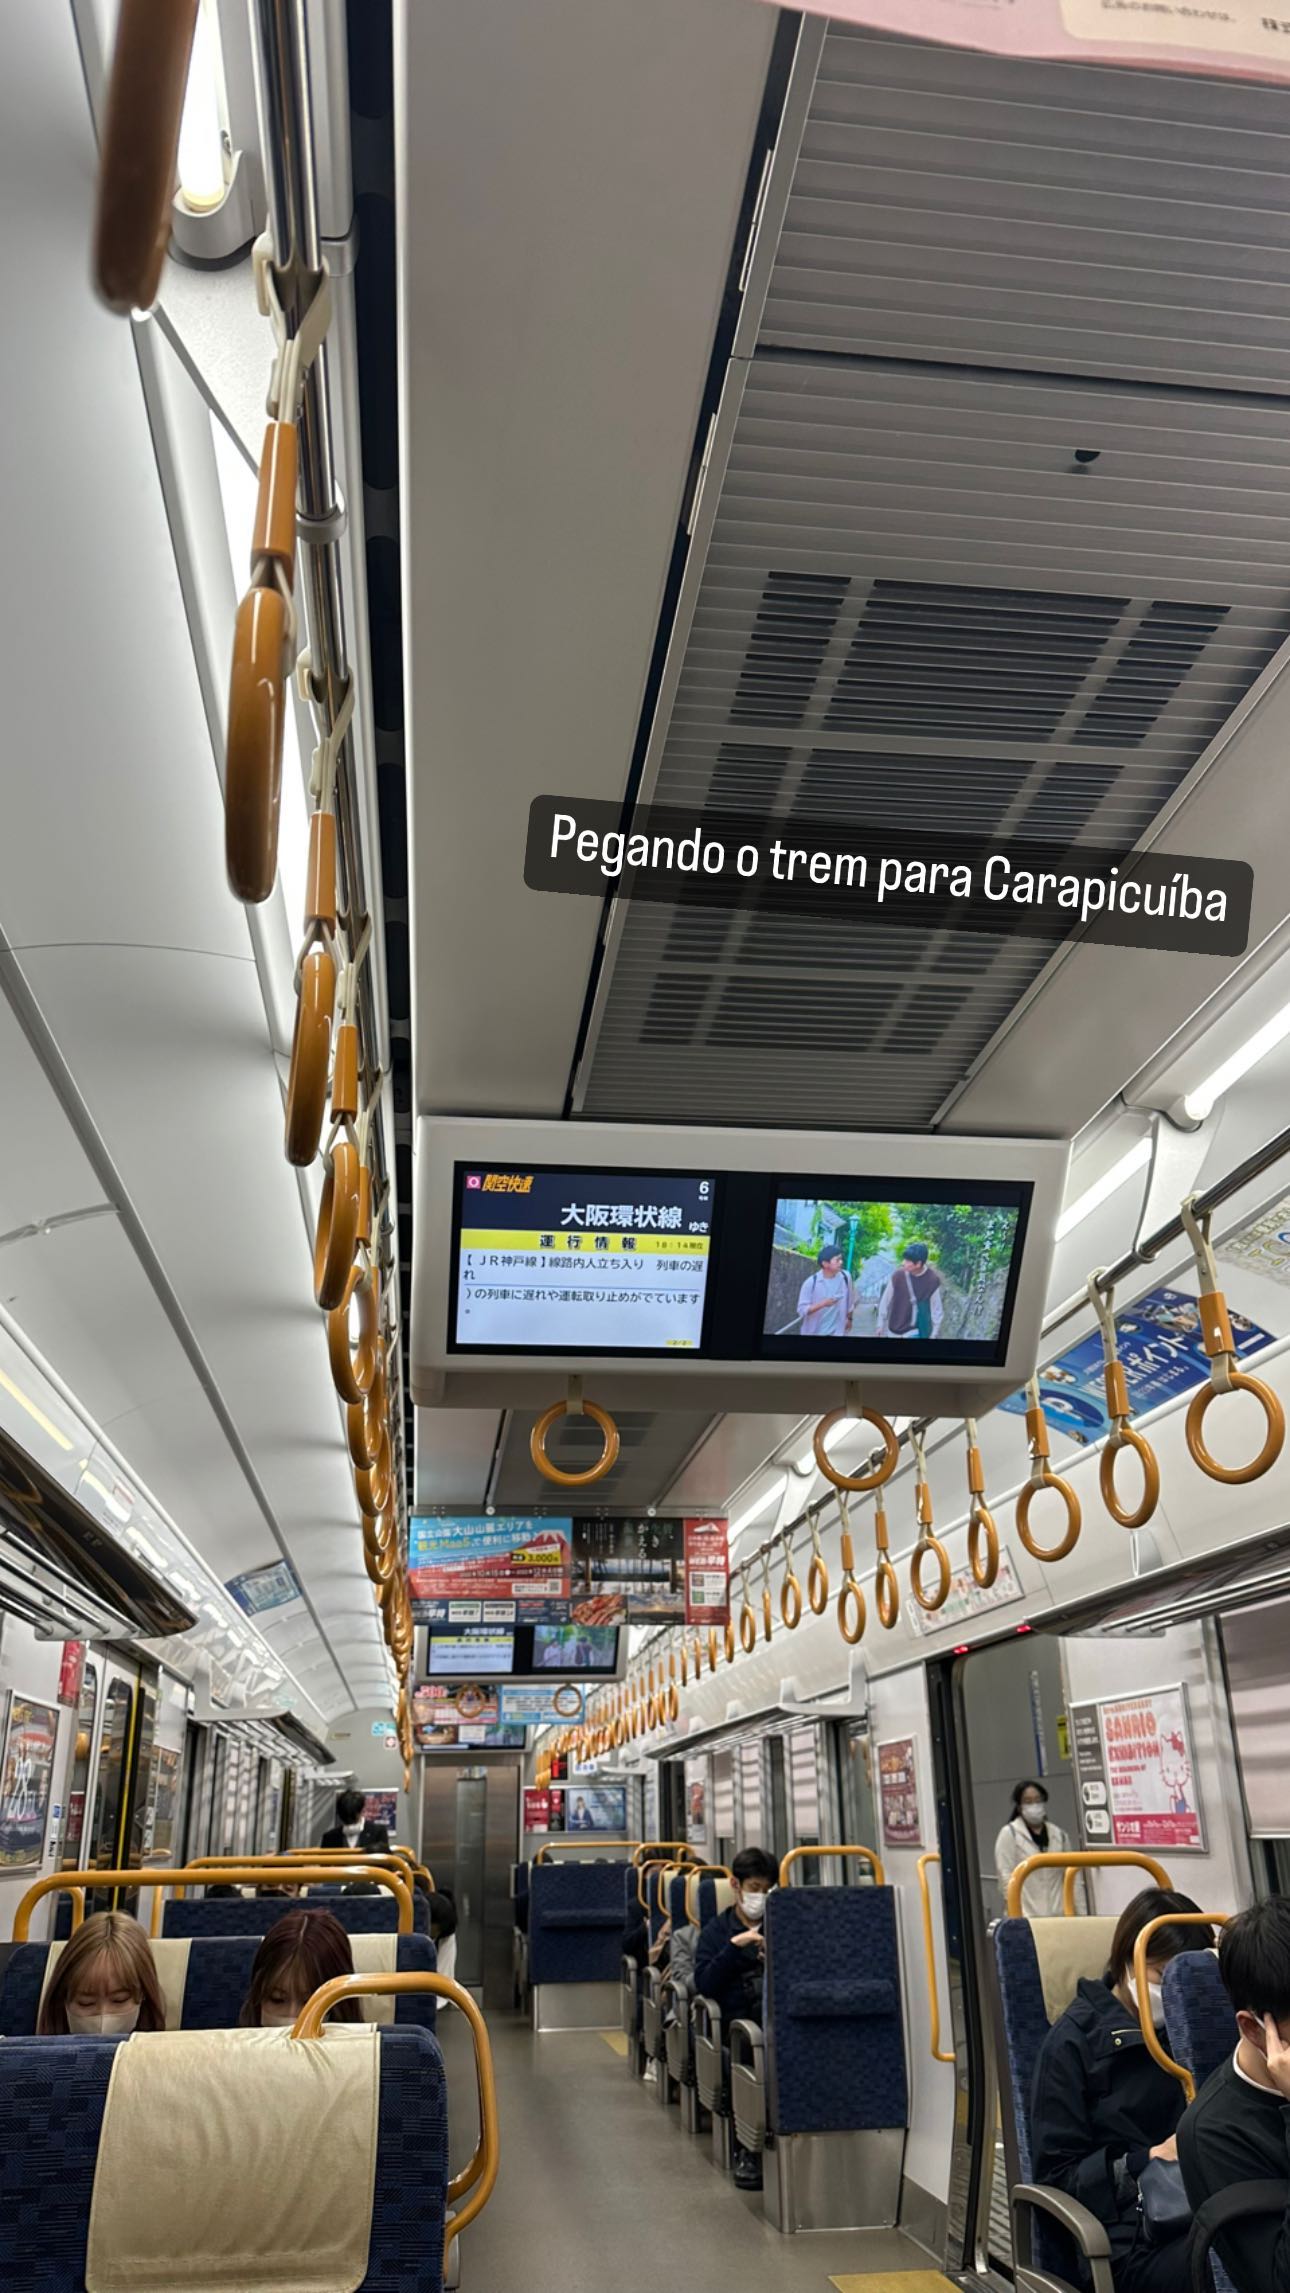 Taking the train to Carapicuíba